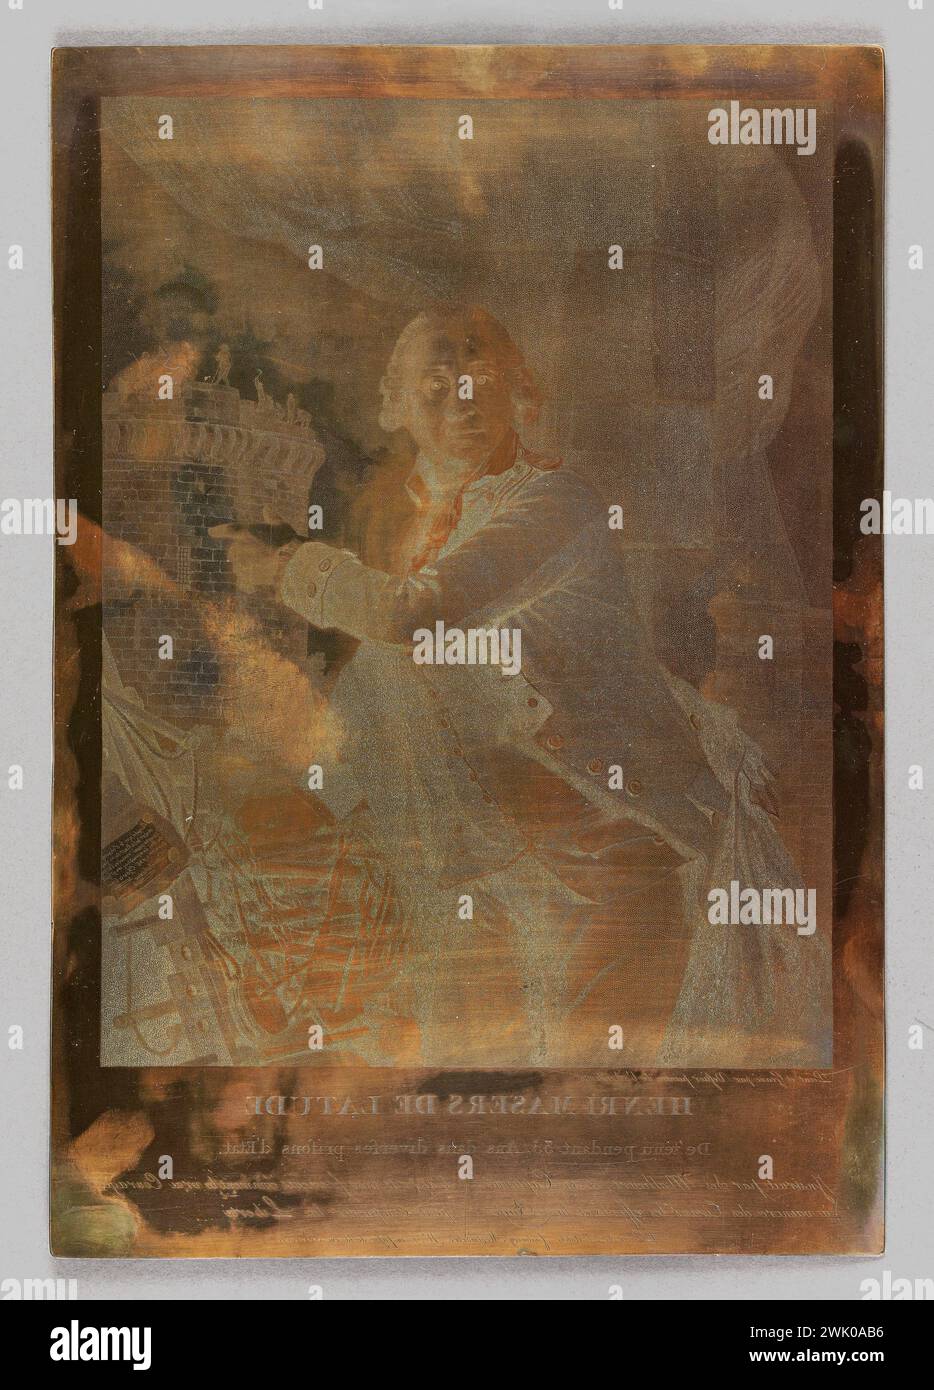 Graved plaque of the portrait of Jean Henry, known as Danry, known as Masers de Latude (1725-1805), French prisoner, by vestier. Greeted copper plate - Jean Henry, dit Danry, dit Masers de Latude (1725-1805), French prisoner,. Copper. Revolutionary period. Paris, Carnavalet museum. Stock Photo